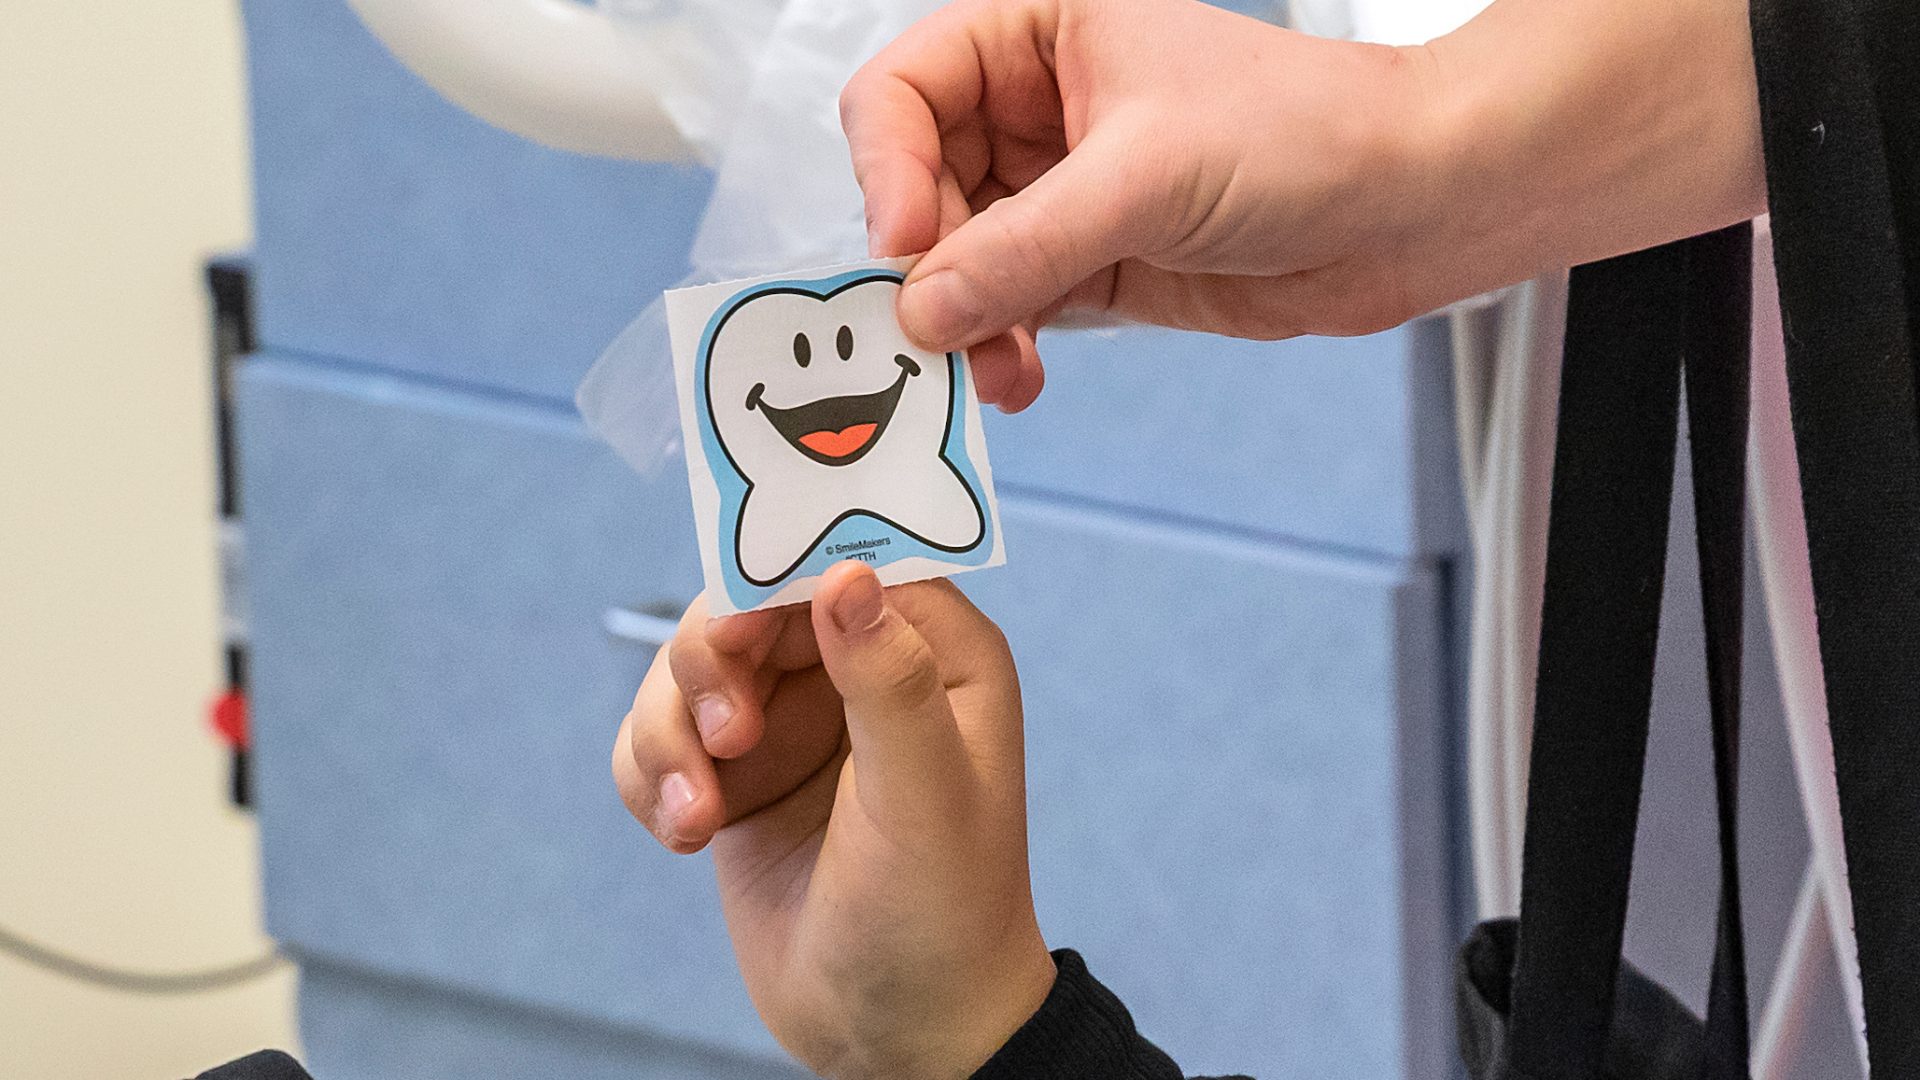 Two people, together, hold a sticker of a tooth cartoon smiling.